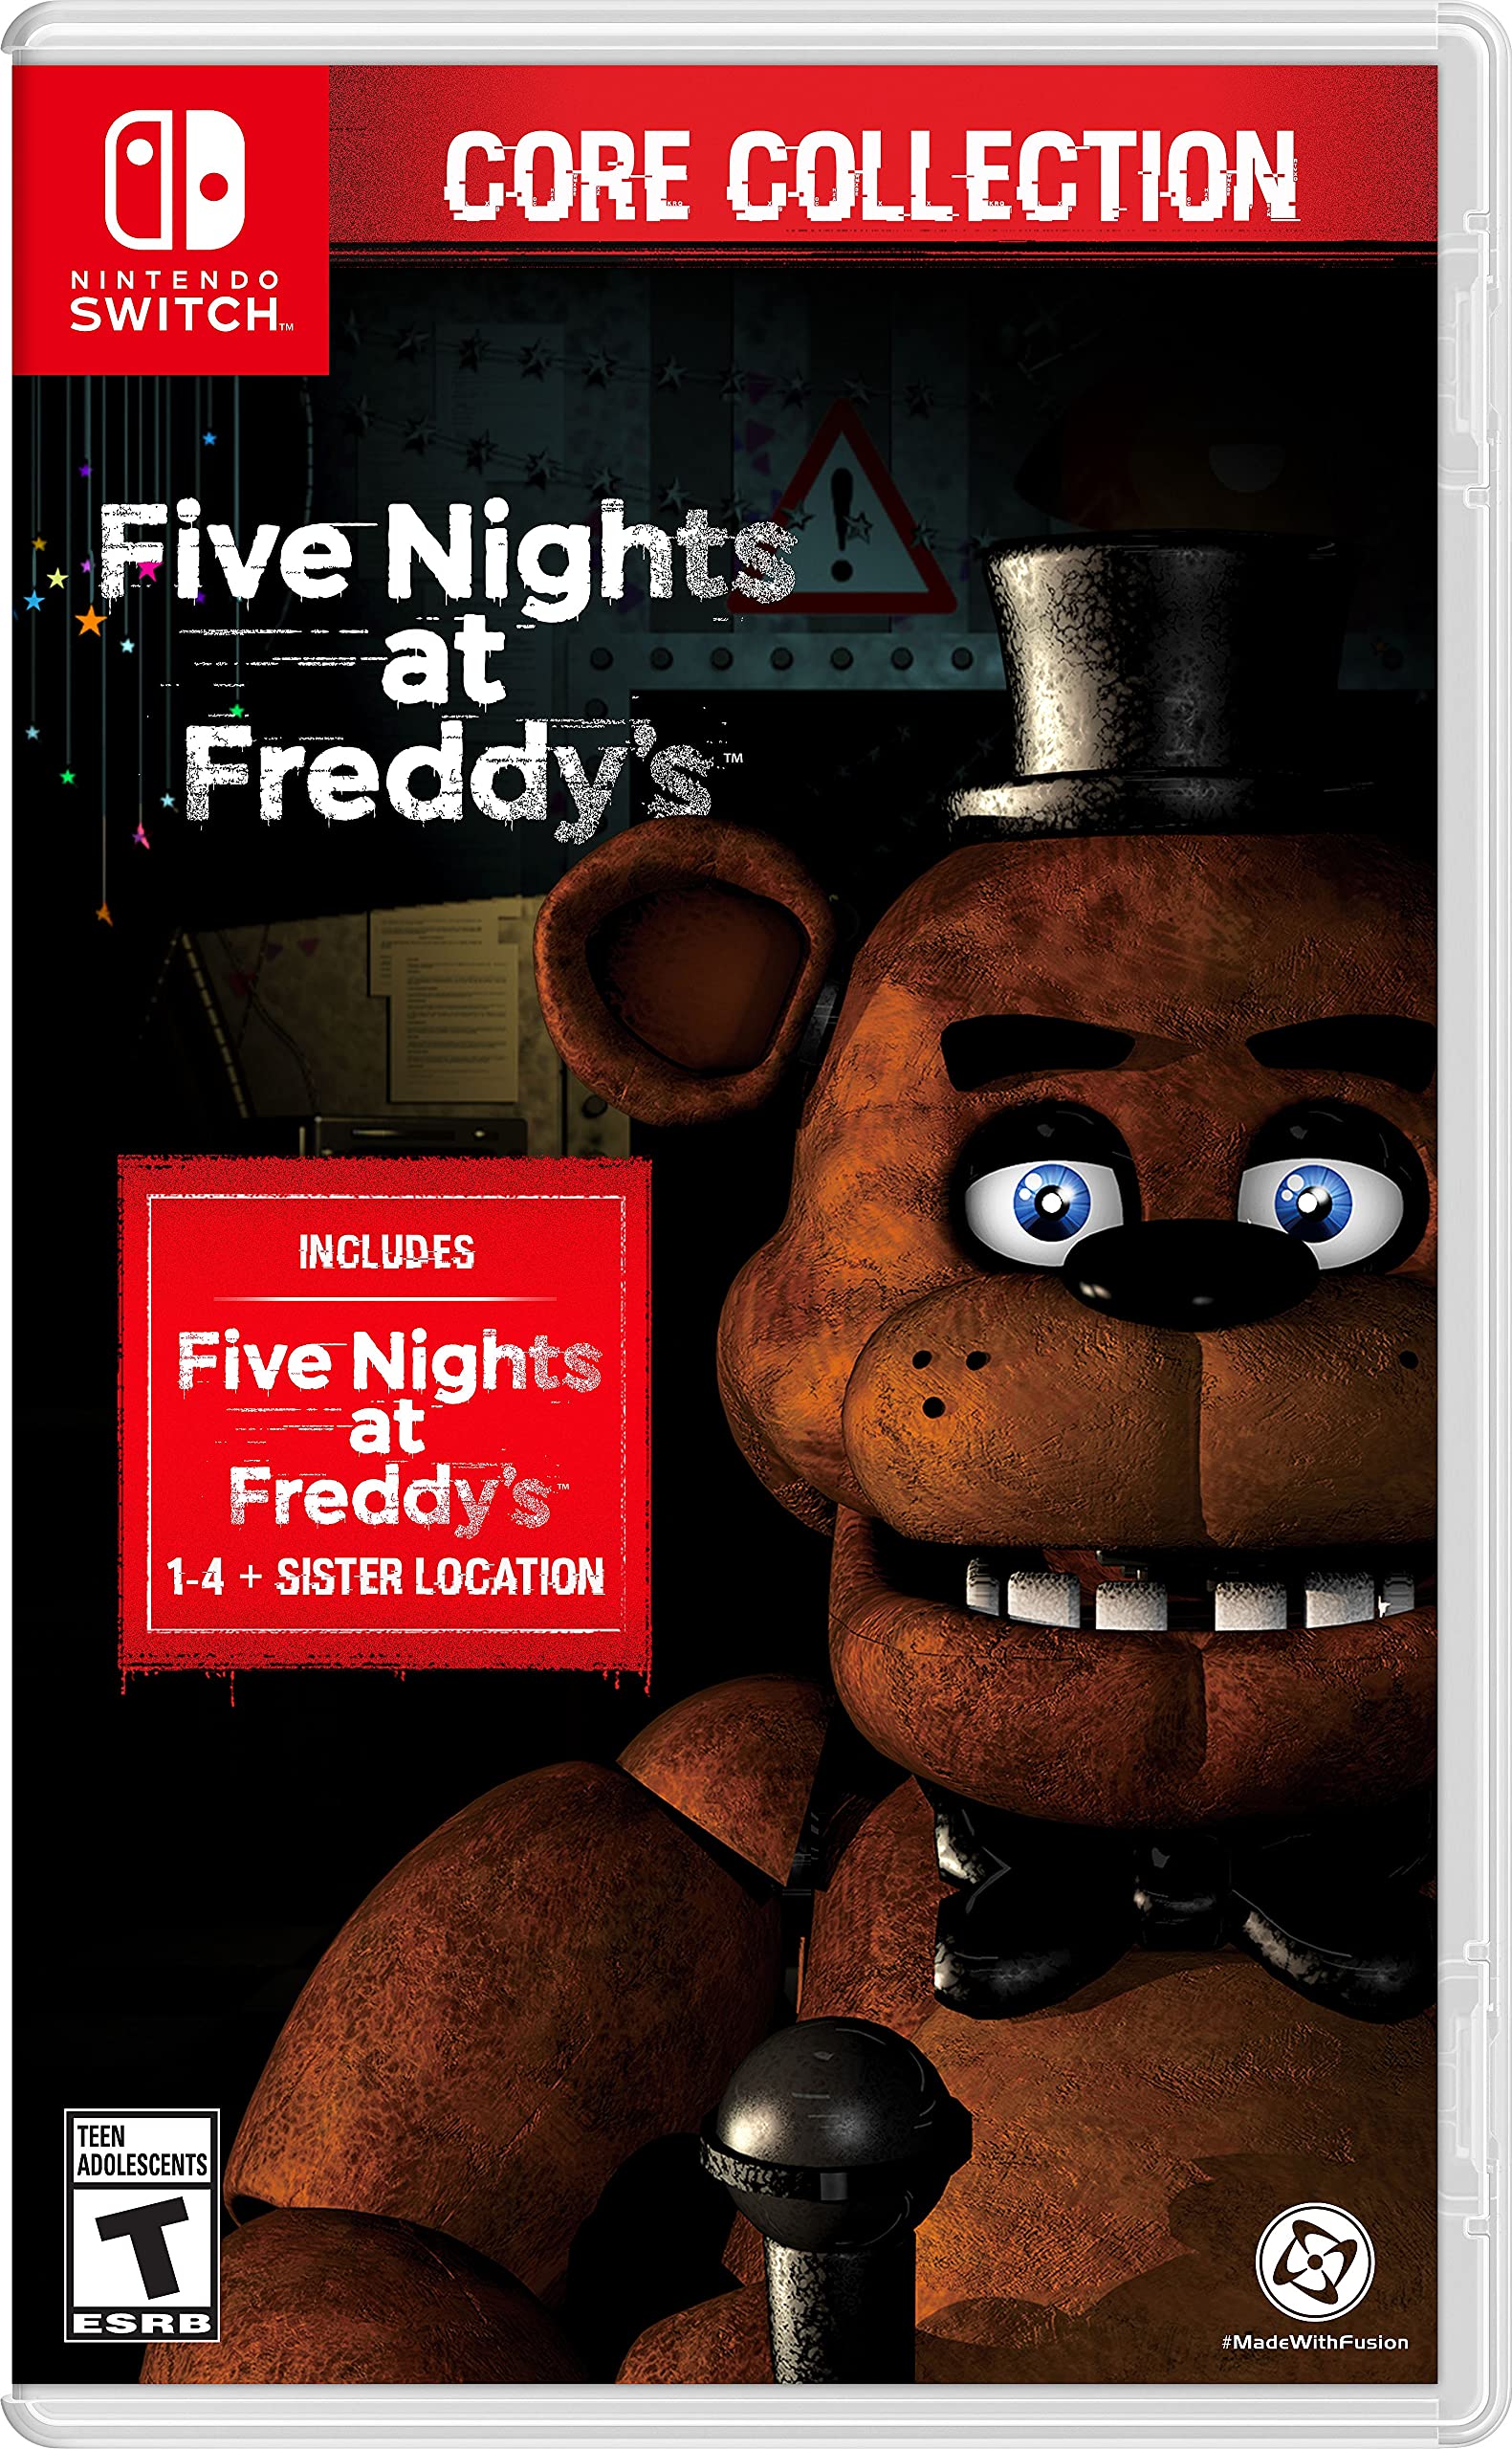 Five Nights at Freddy's: The Core Collection (Nintendo Switch, Physical) $19.93 + Free Shipping w/ Prime or on $35+